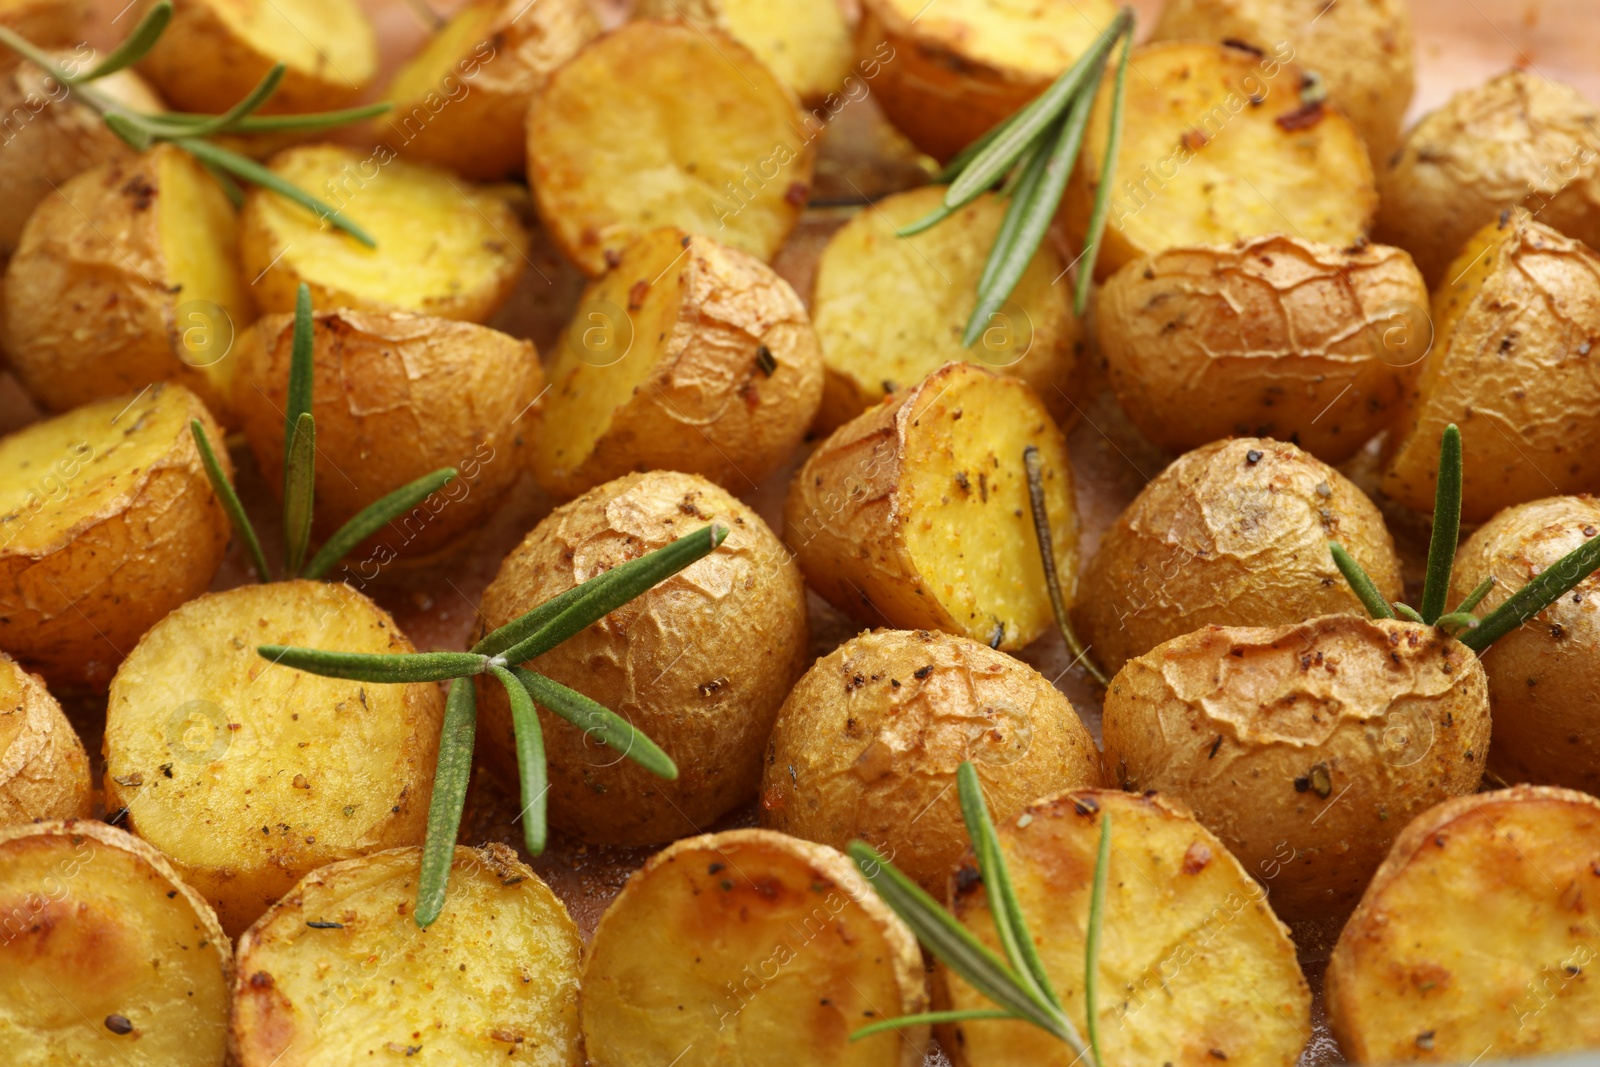 Photo of Delicious baked potatoes with rosemary as background, closeup